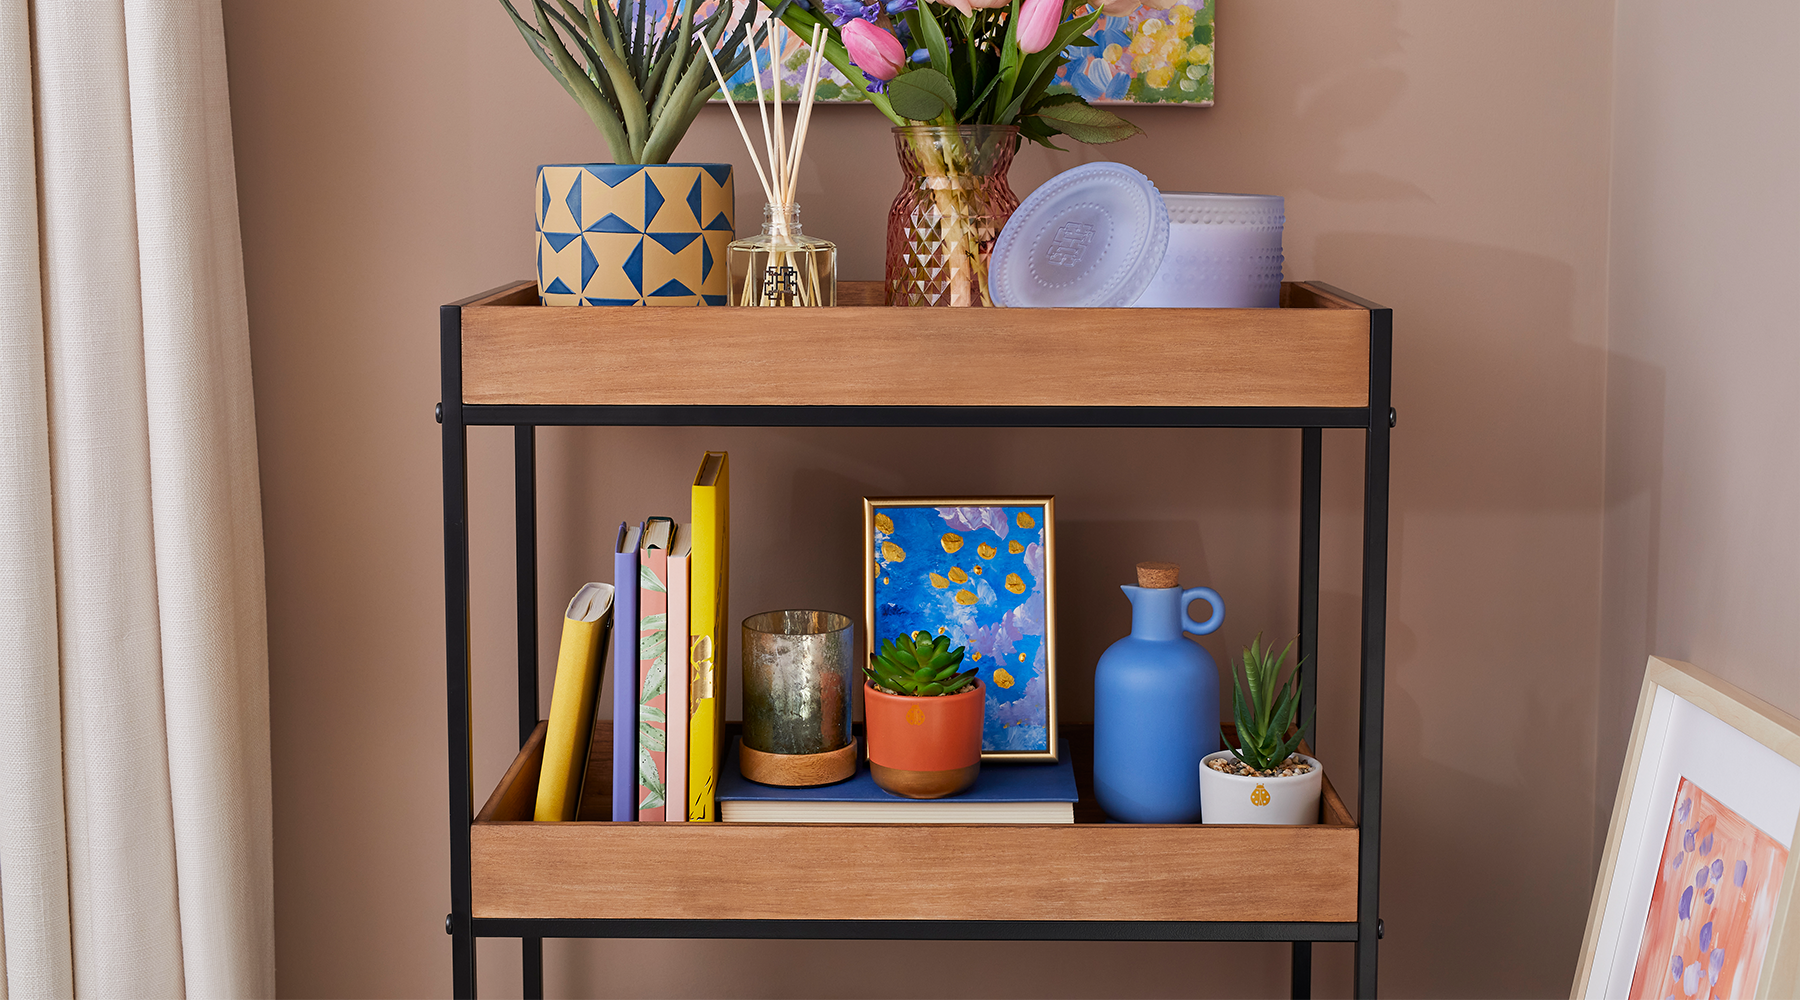 816657 - My Home Stories shelving unit